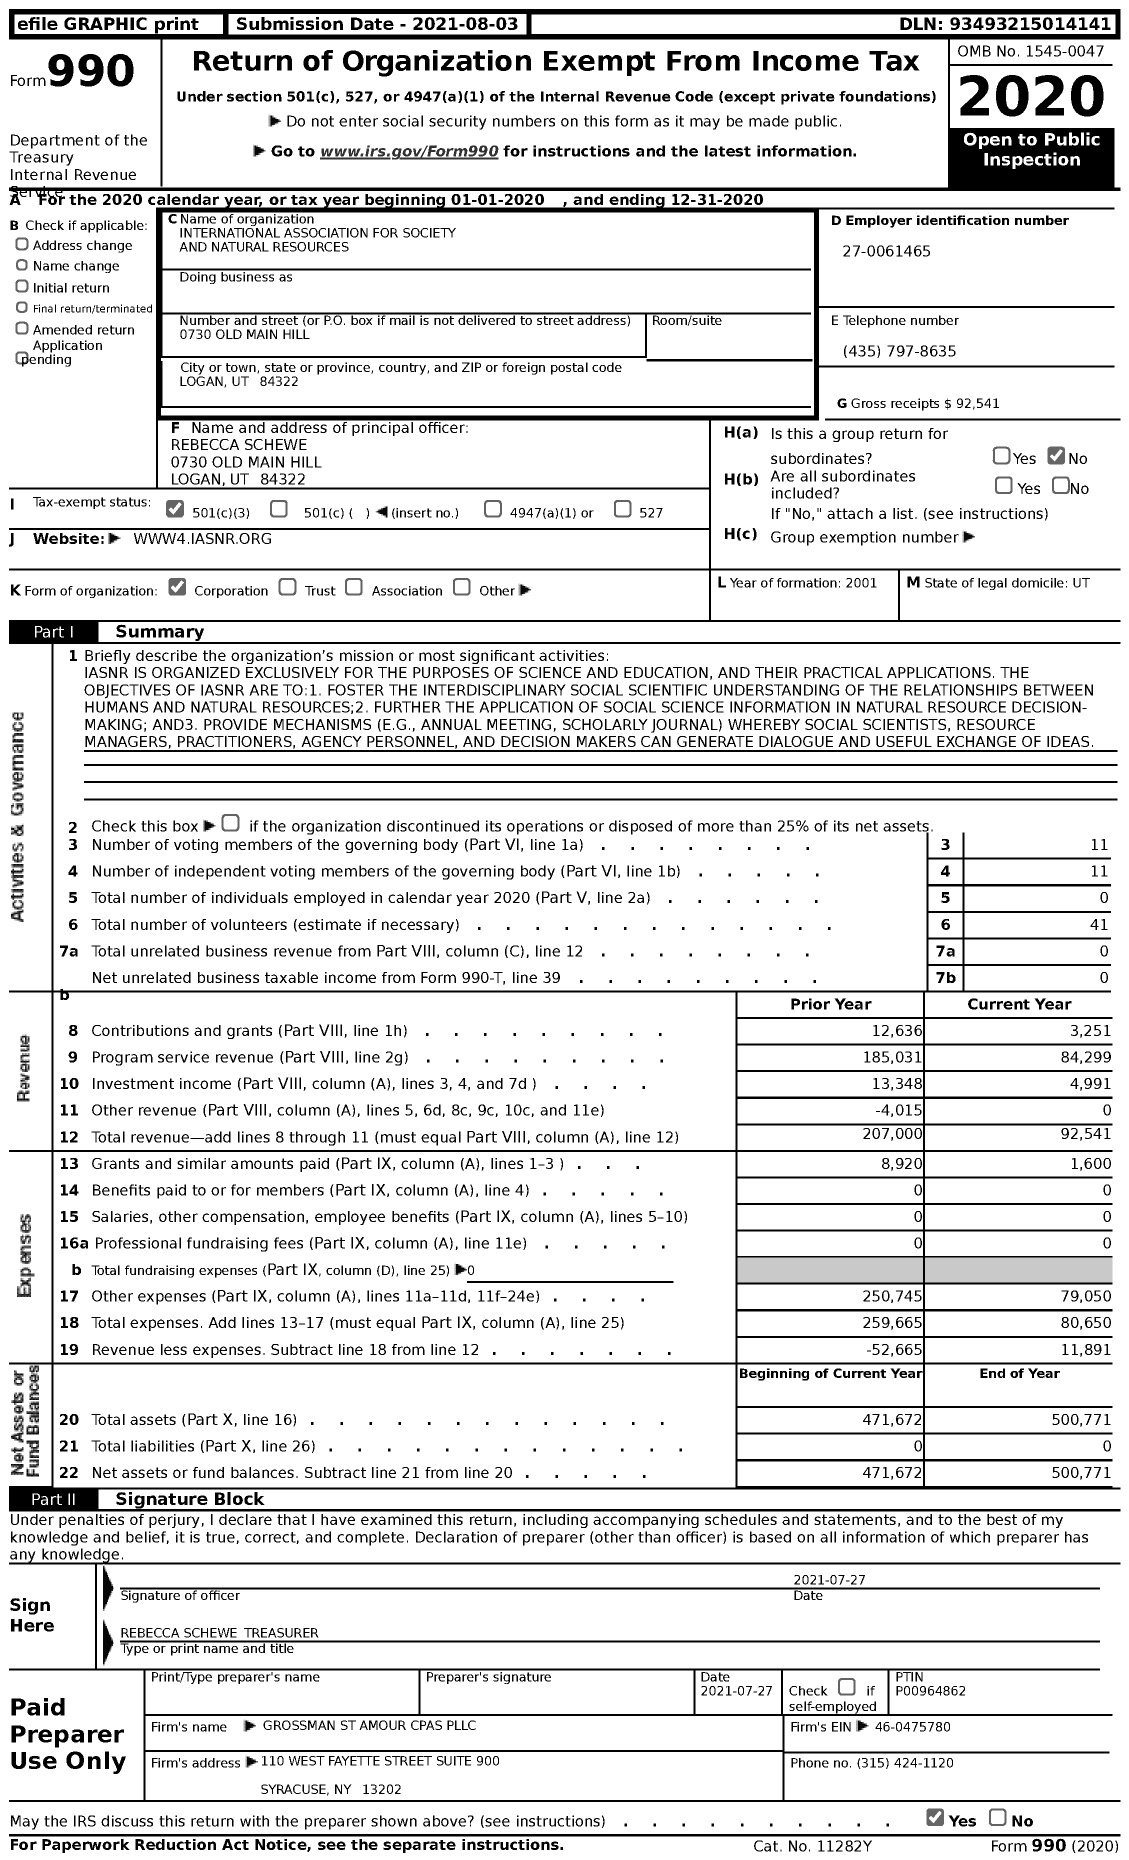 Image of first page of 2020 Form 990 for International Association for Society and Natural Resources